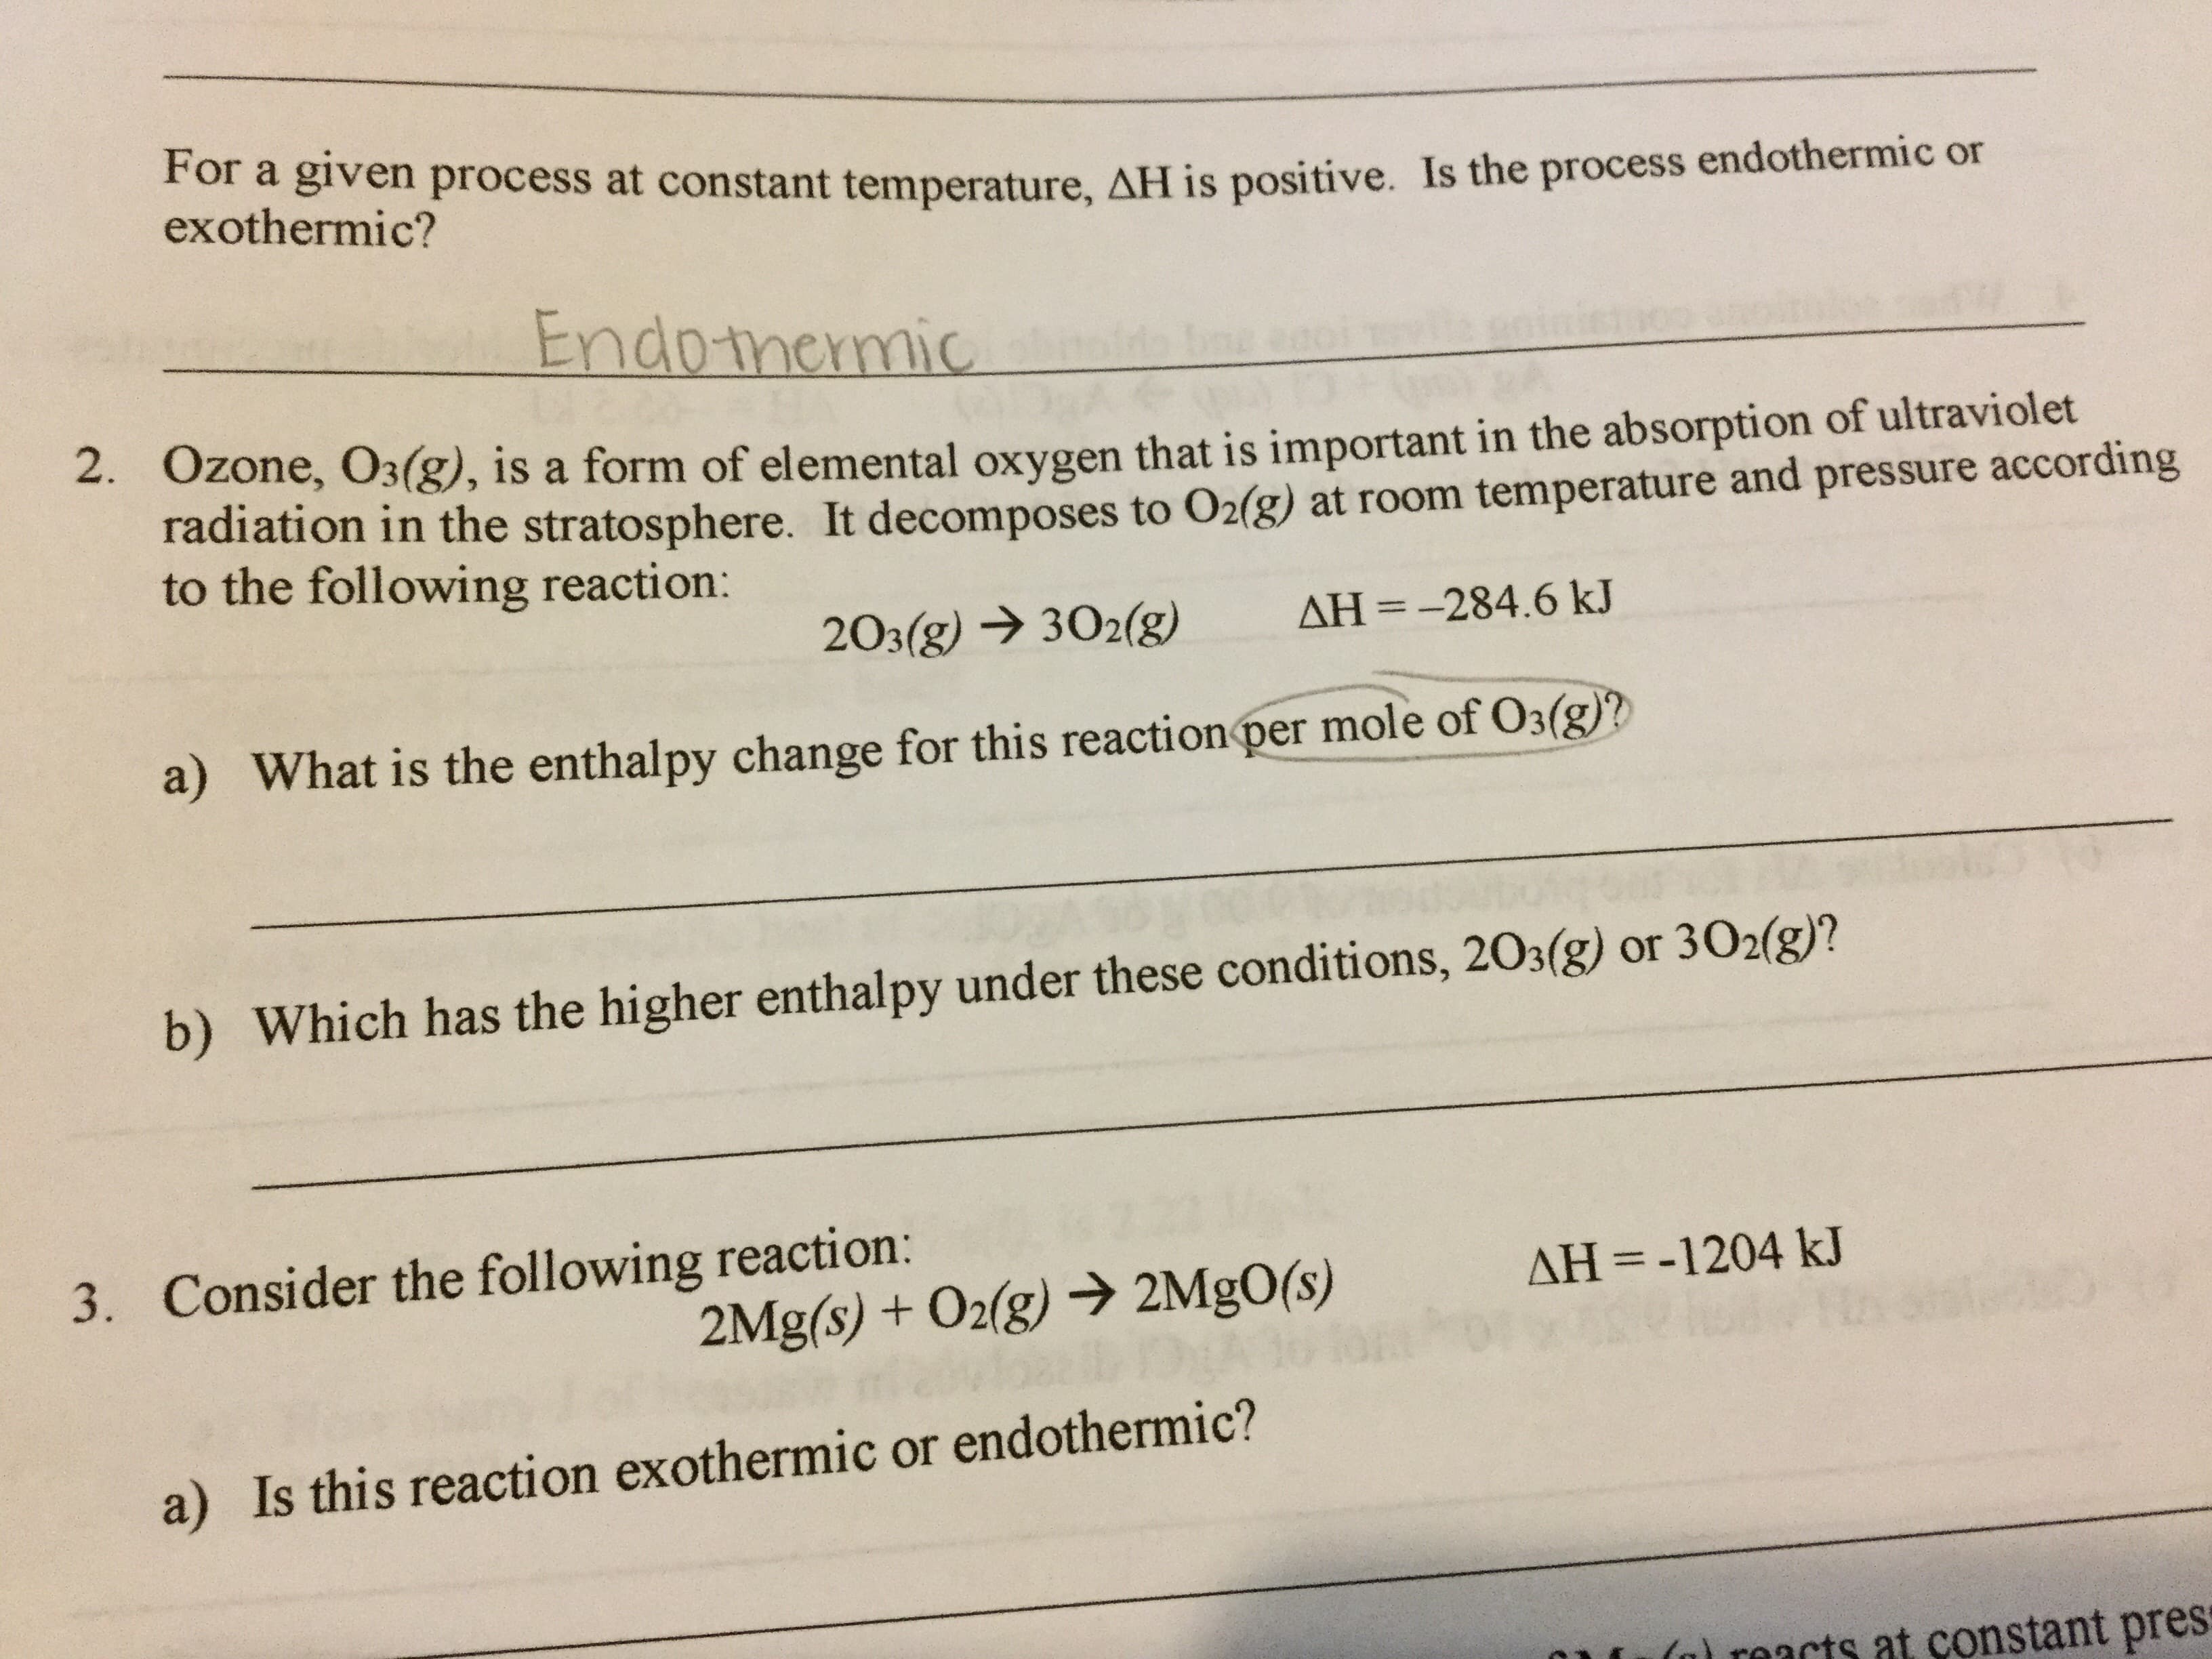 For a given process at constant temperature, AH is positive. Is the process endothermic or
exothermic?
Endomemic
2. 0zone, O3(g), is a form of elemental oxygen that is important in the absorption of ultraviolet
radiation in the stratosphere. It decomposes to O2(g) at room temperature and pressure according
to the following reaction:
AH =-284.6 kJ
203(g)302(g)
a) What is the enthalpy change for this reaction per mole of O3(g)?
b) Which has the higher enthalpy under these conditions, 203(g) or 302(g)?
Consider the following reaction:
3.
AH-1204 kJ
2Mg(s) + O2(g)2Mg0(s)
a) Is this reaction exothermic or endothermic?
) rmacts at constant pres
